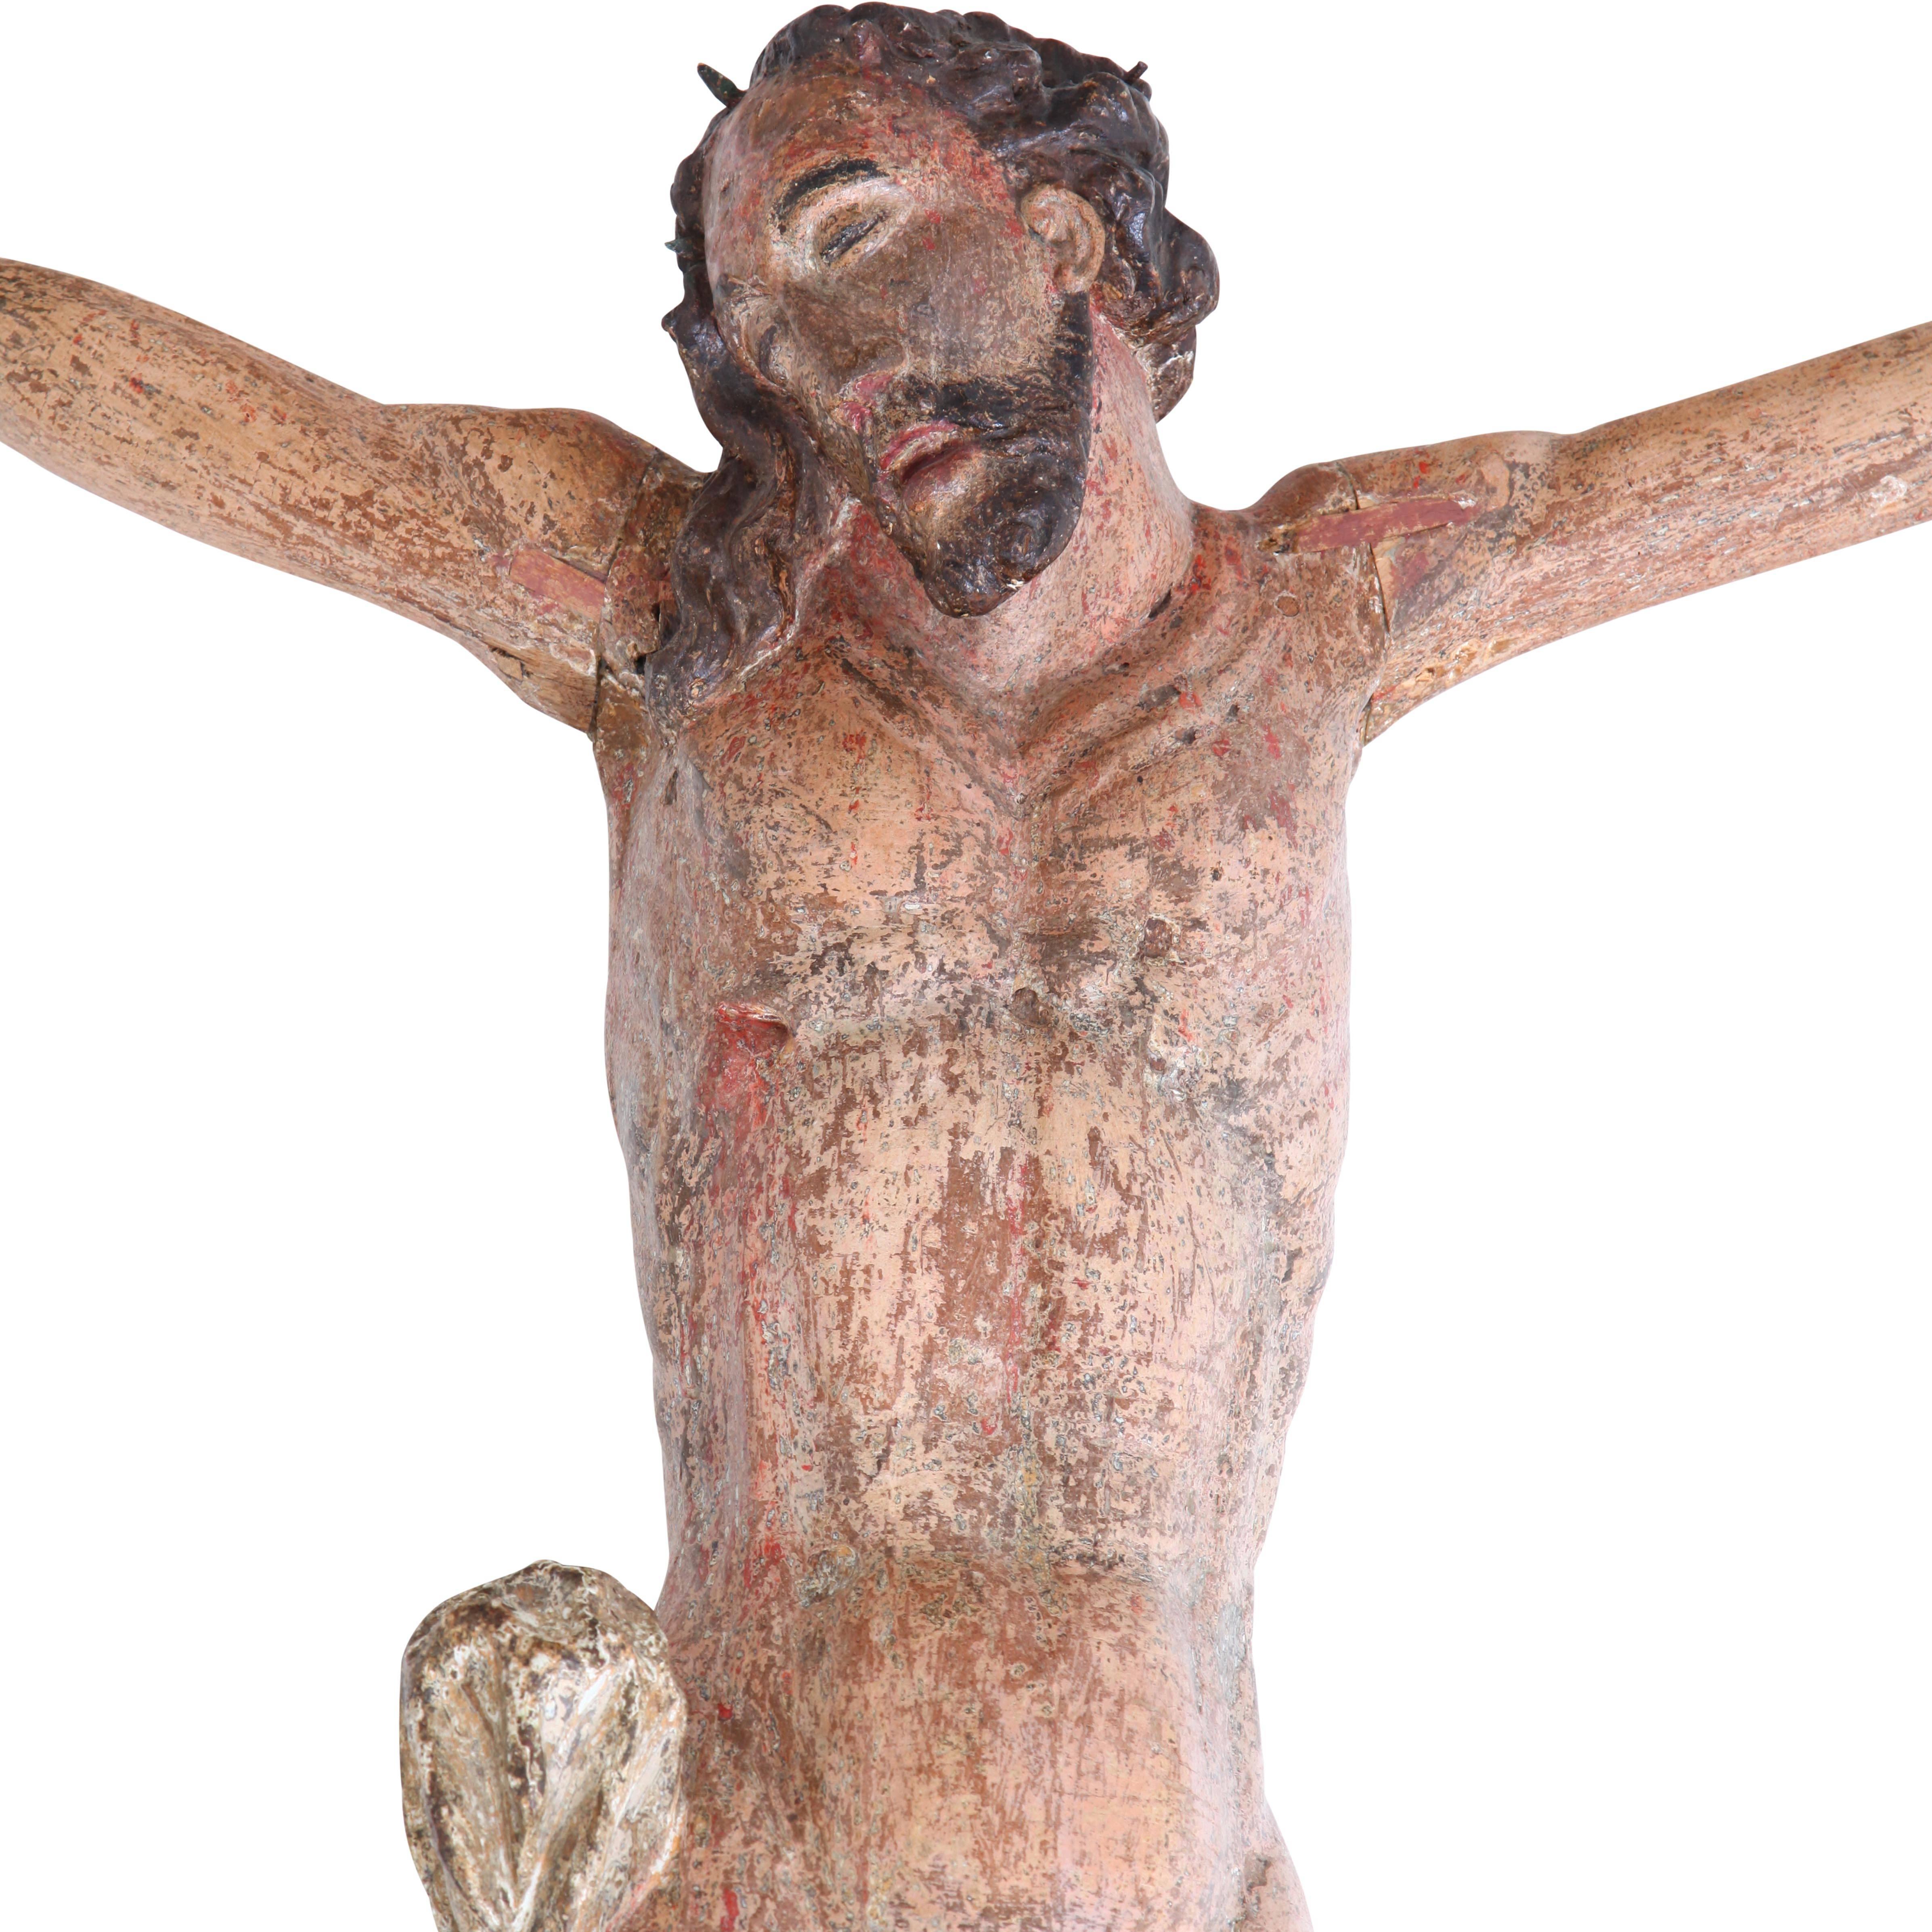 Sculpture of Jesus Christ on a Cross with white loincloth. The paint shows partly wear.